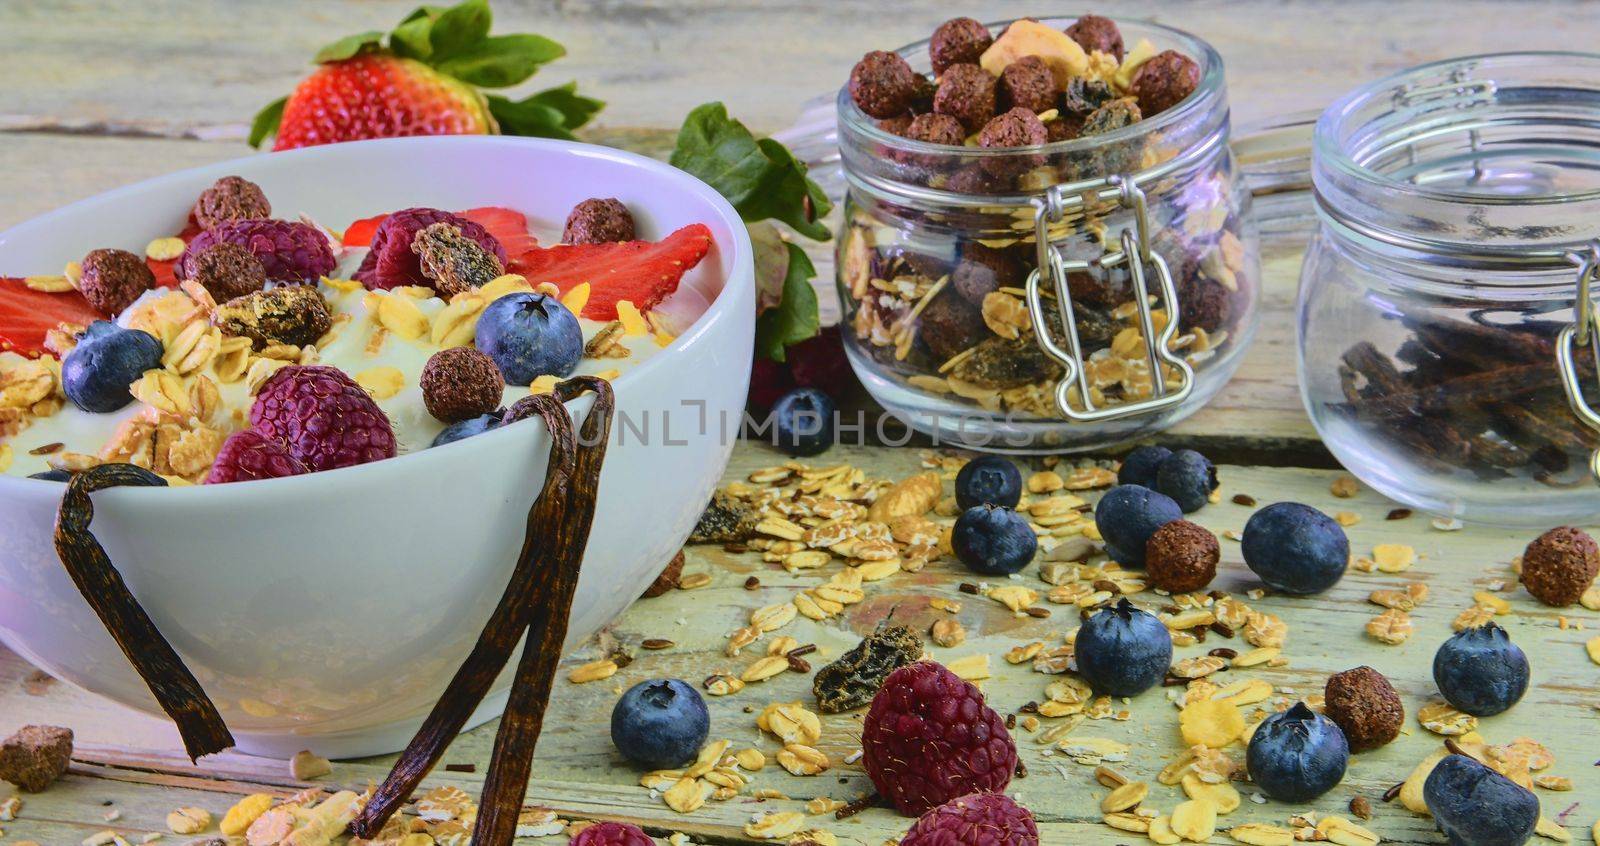 Healthy breakfast, cereal with yoghurt, strawberries, blueberries, raspberries and muesli on wooden rustic background.  Concept of: fitness, diet, wellness and breakfasts by roman_nerud